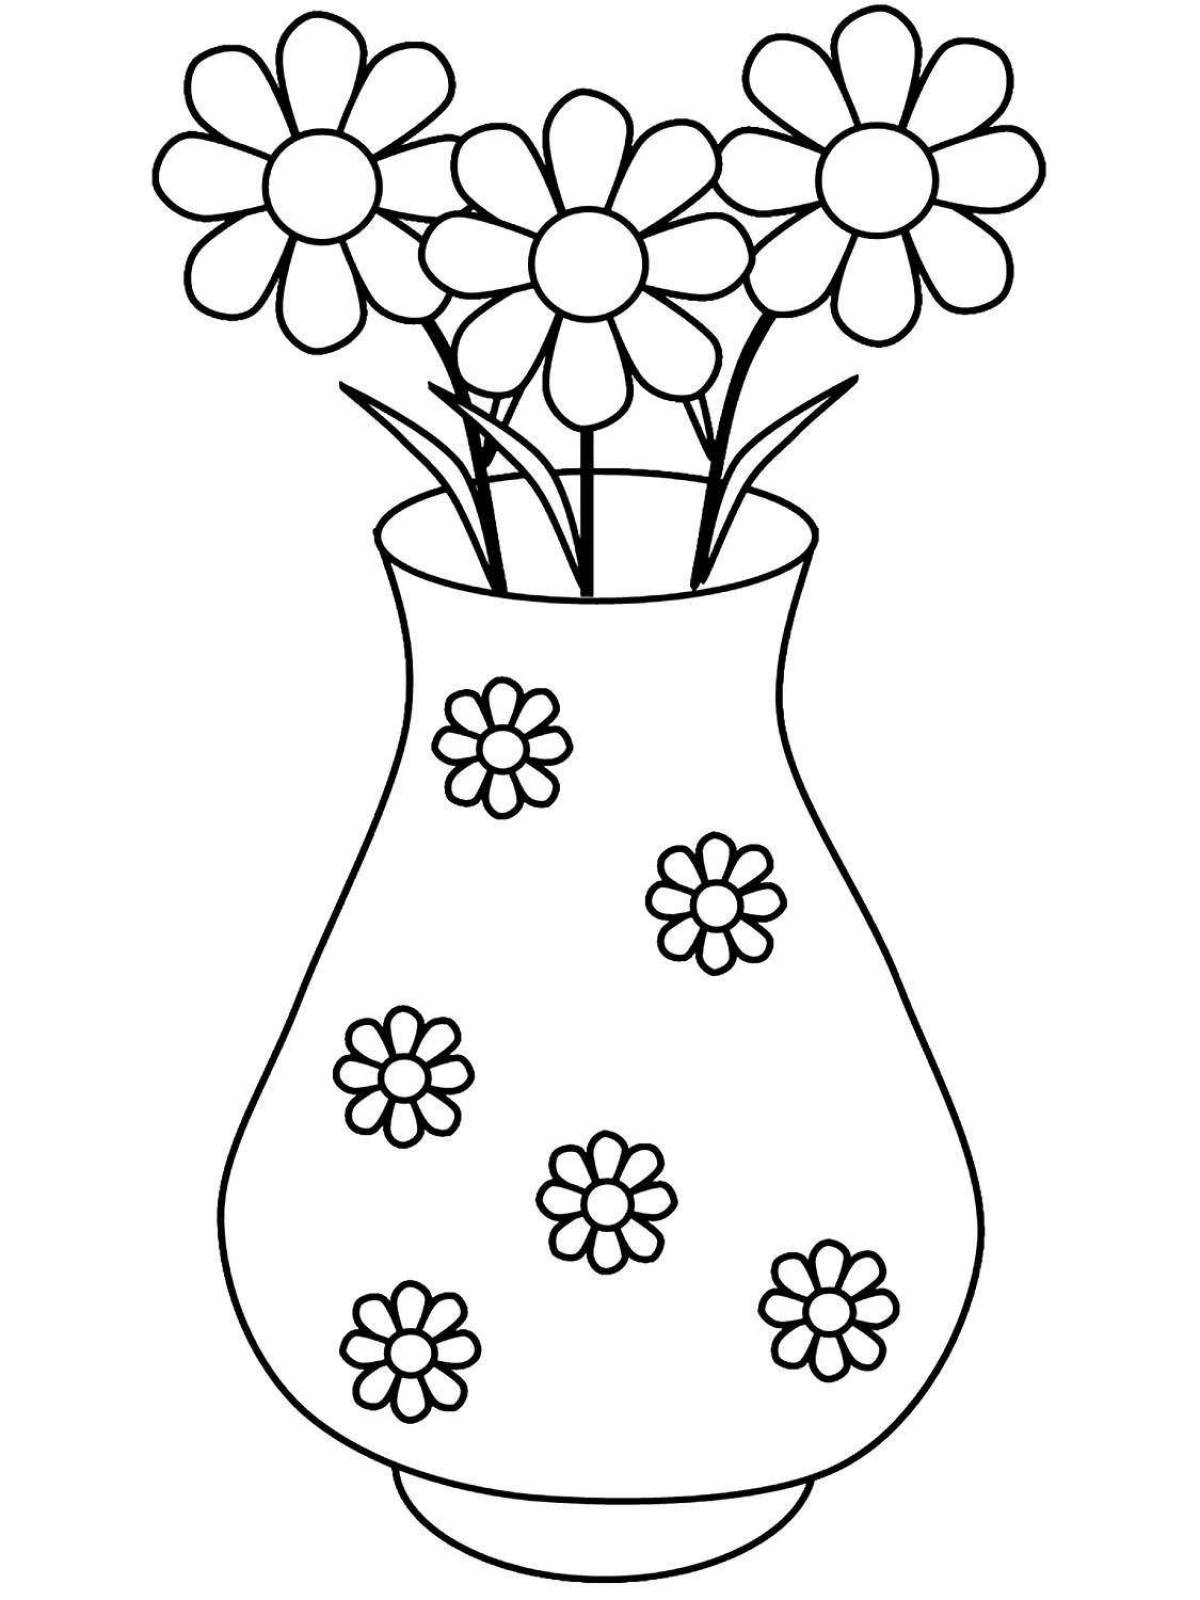 Amazing vase of flowers coloring book for kids 5-6 years old